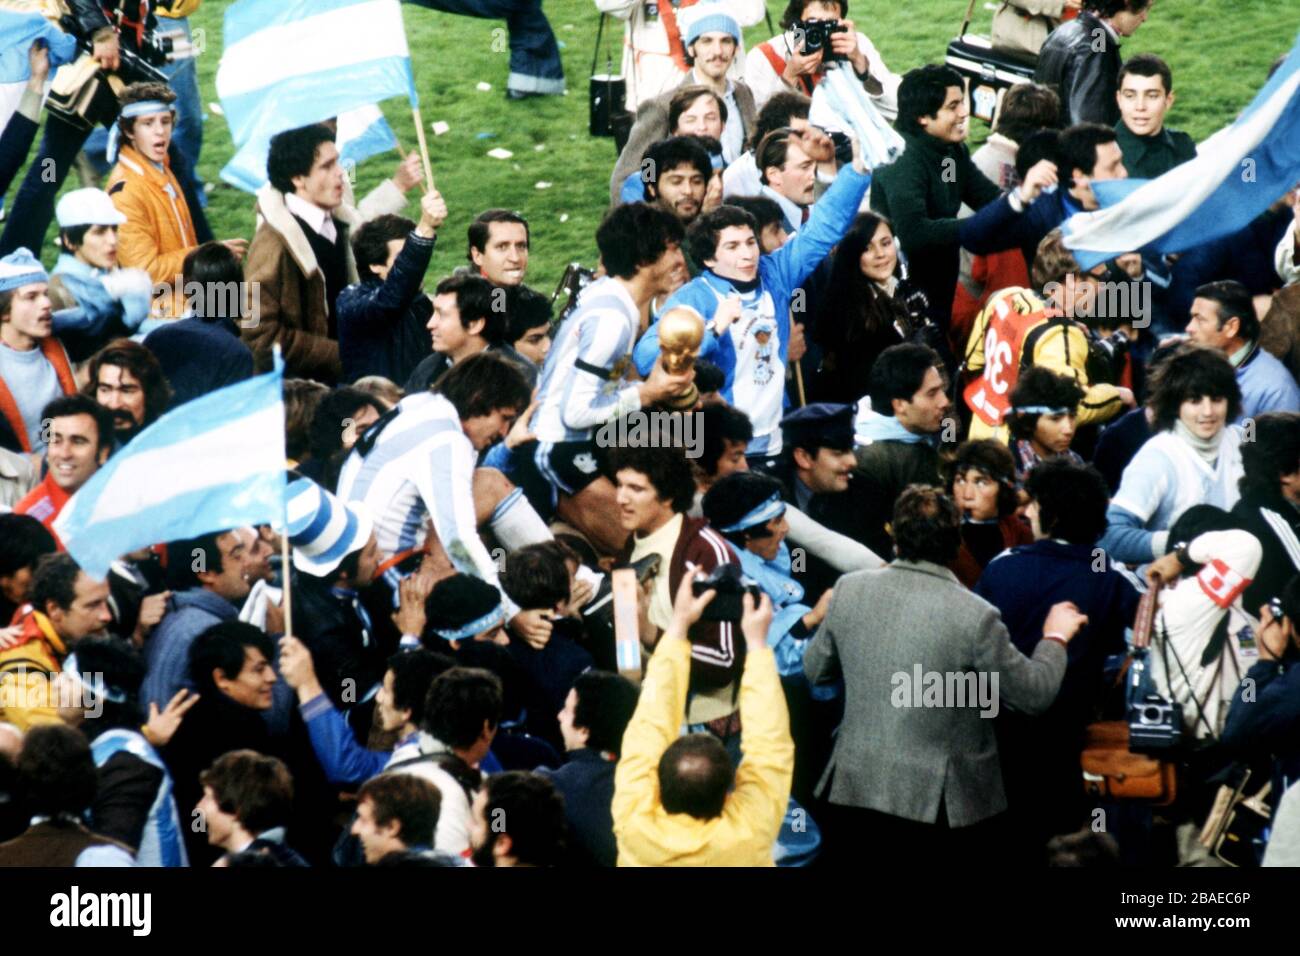 Argentina captain Daniel Passarella, clutching the World Cup tightly, is carried shoulder-high by celebrating Argentina fans after the match Stock Photo